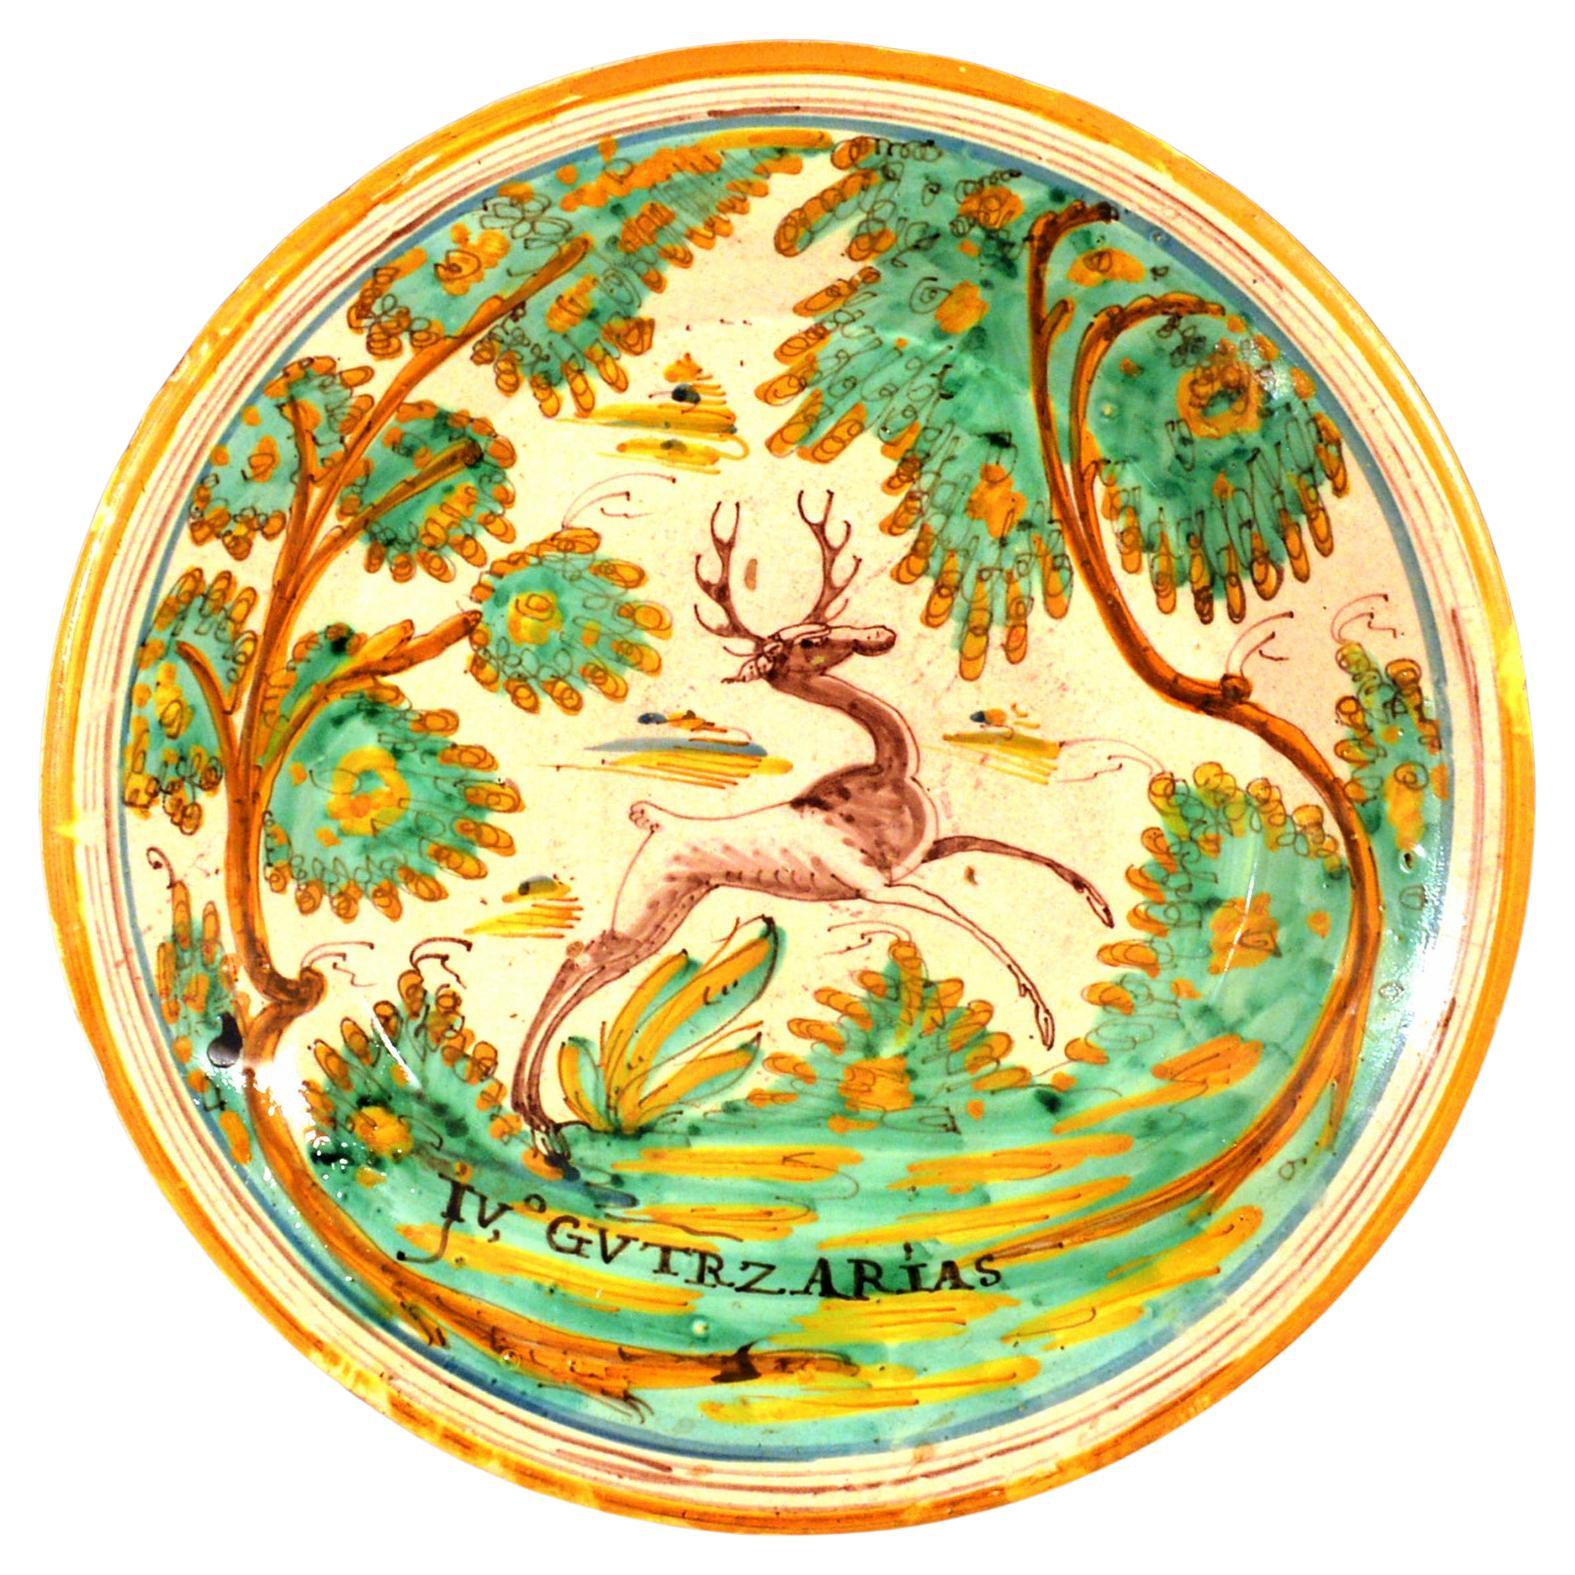 Spanish Faience Charger with Leaping Stag, Talavera, circa 1780-1800 For Sale